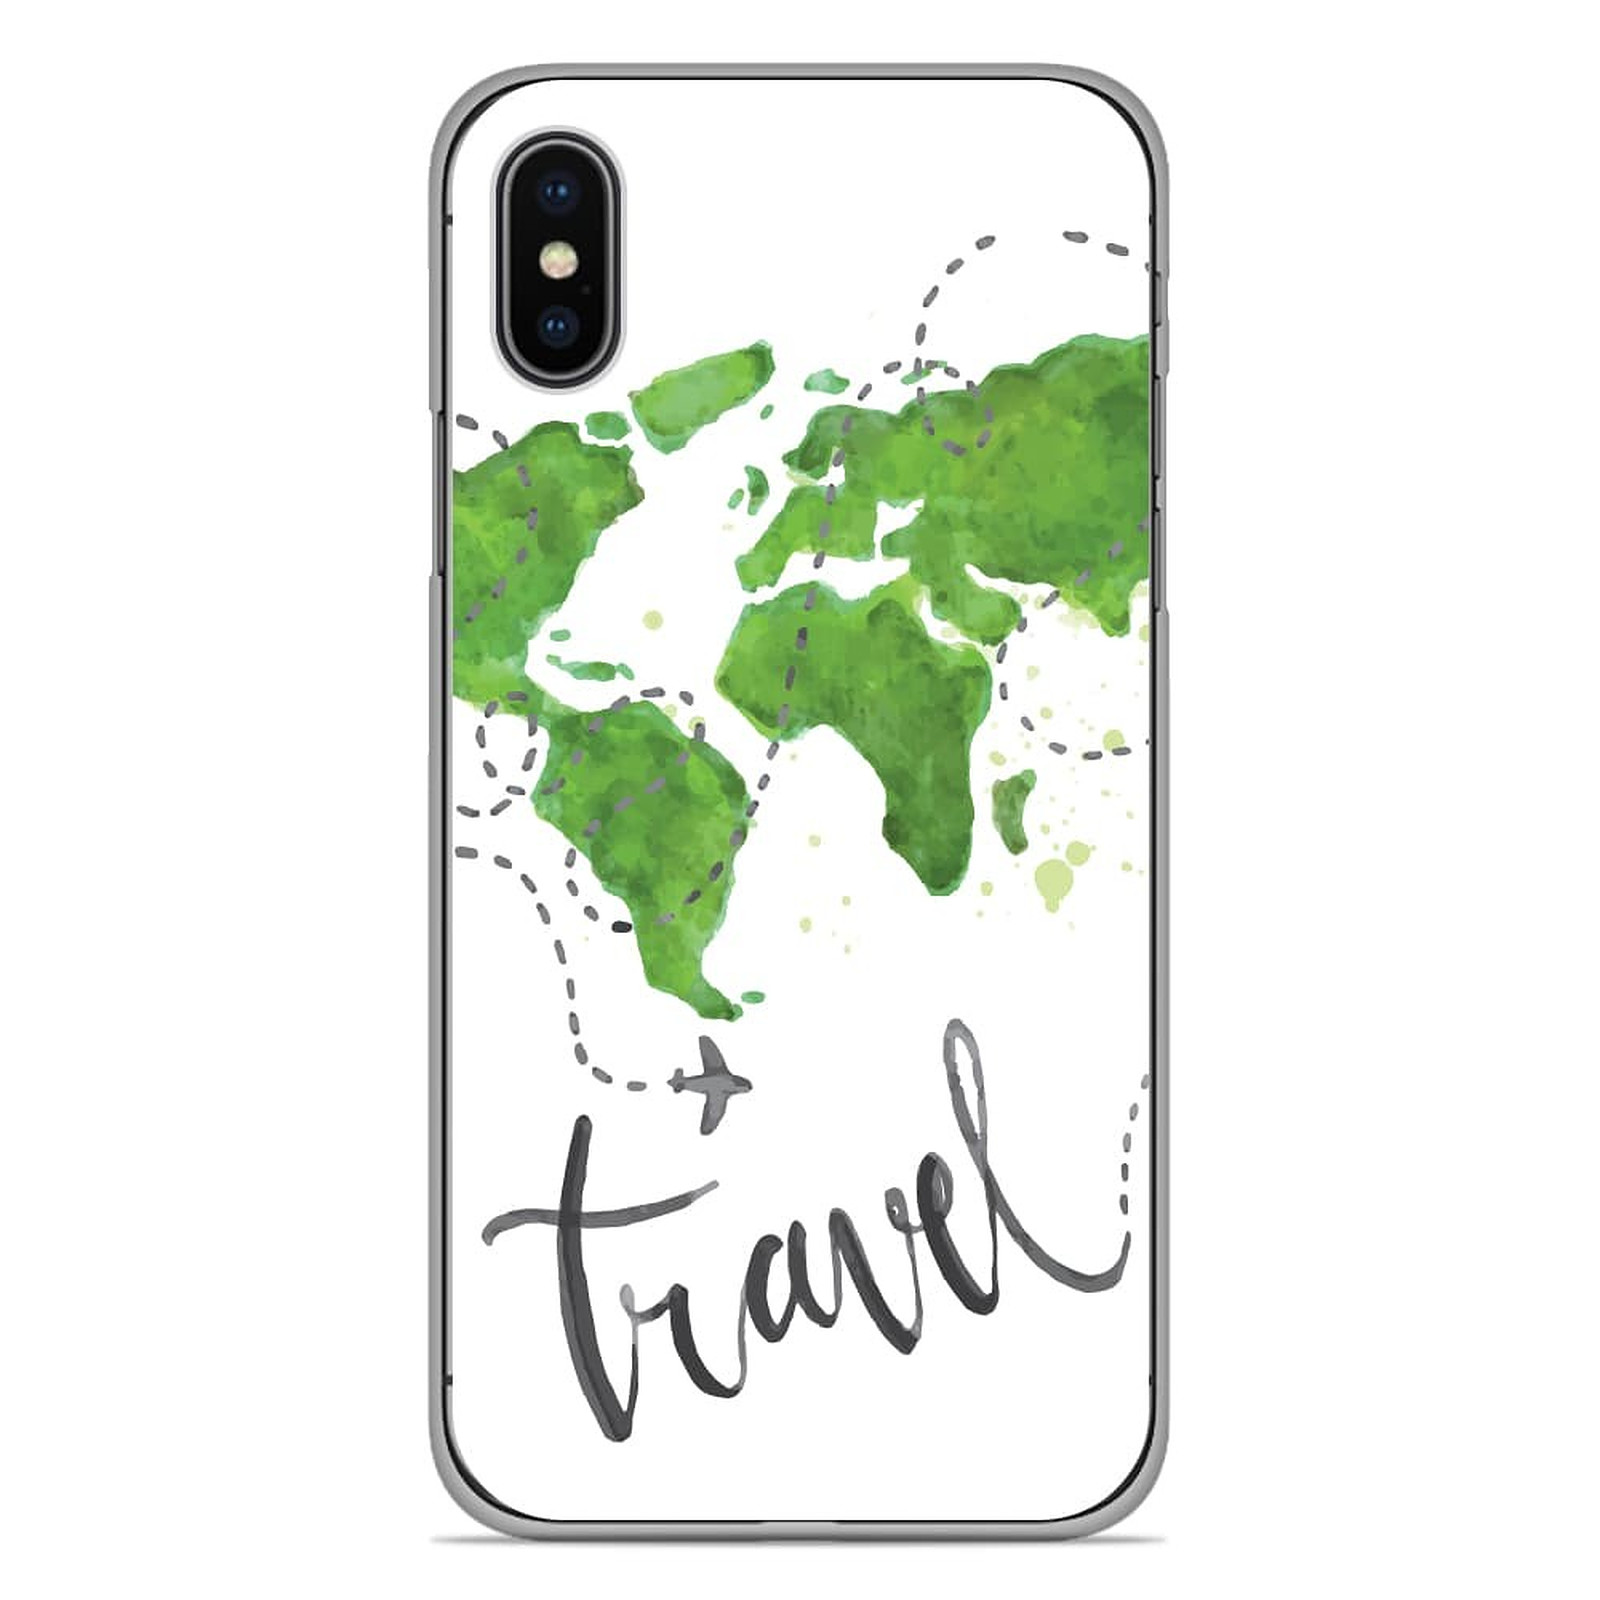 1001 Coques Coque silicone gel Apple iPhone XS Max motif Map Travel - Coque telephone 1001Coques